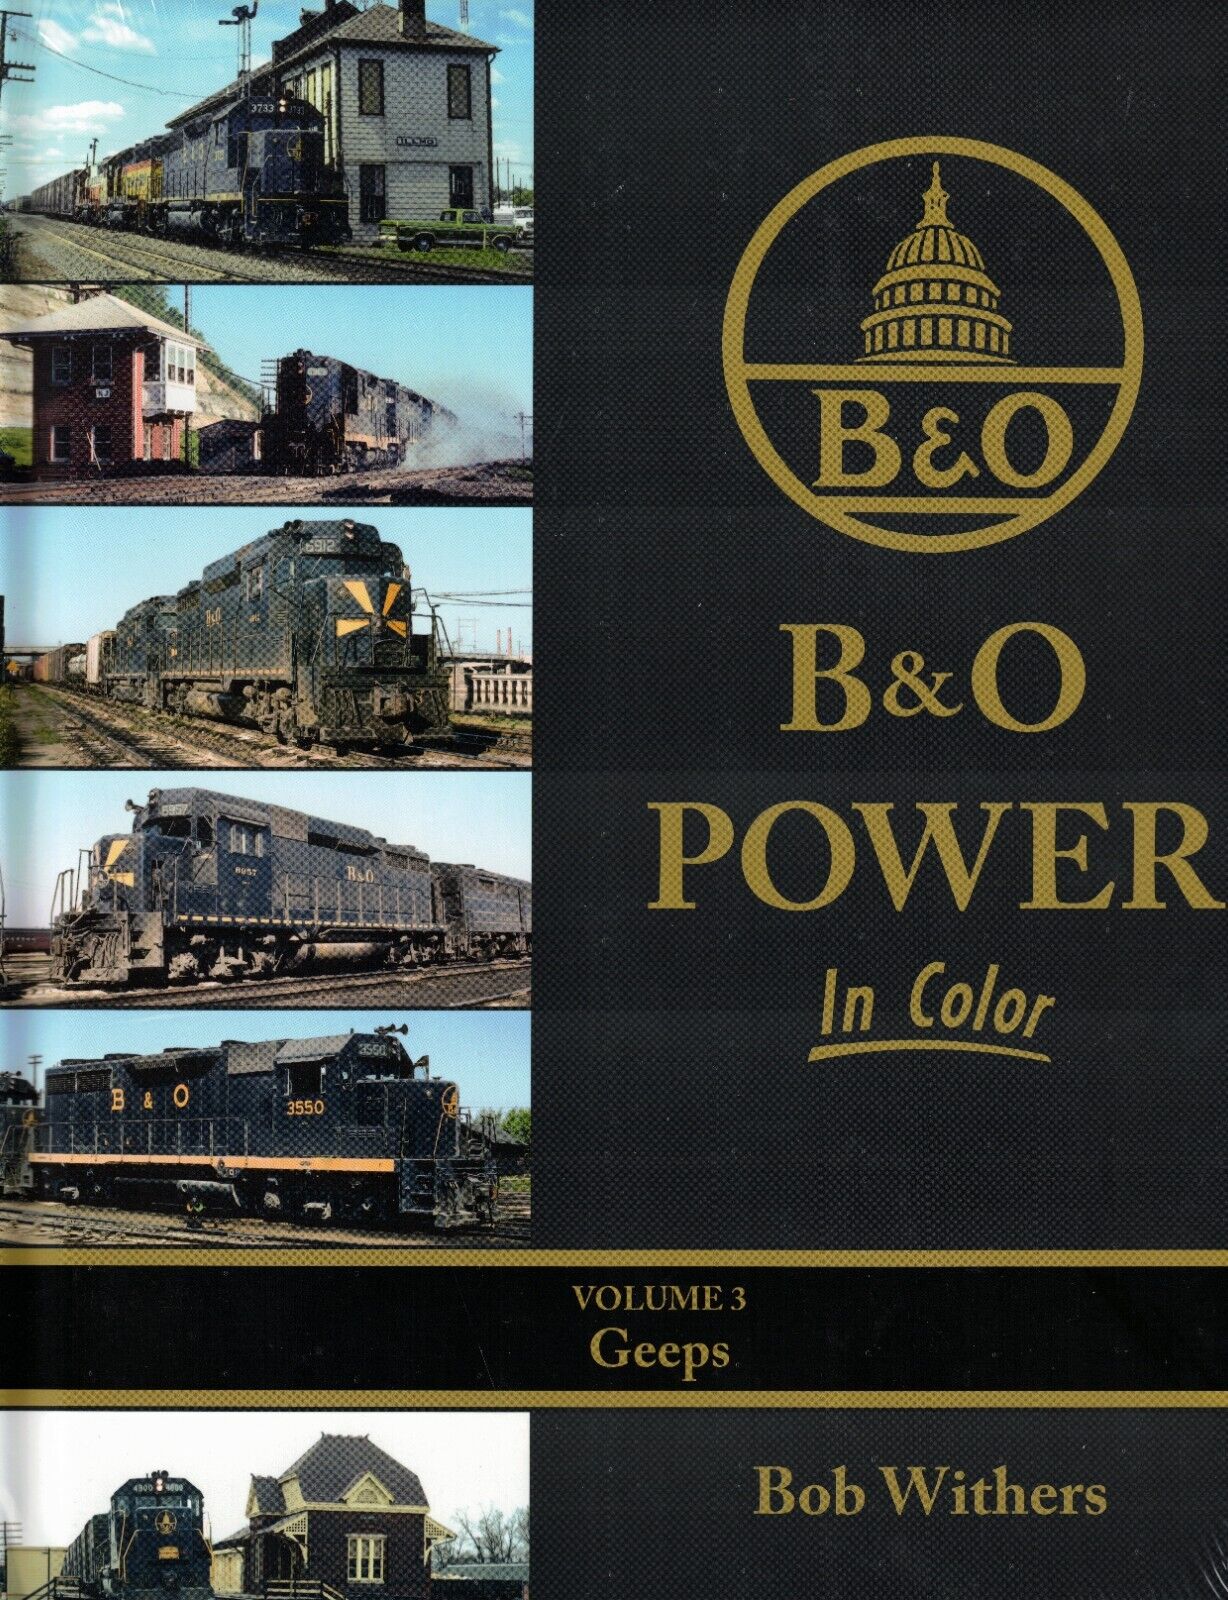 B&O Power in Color Volume 3 - Geeps (New) - Morning Sun Books